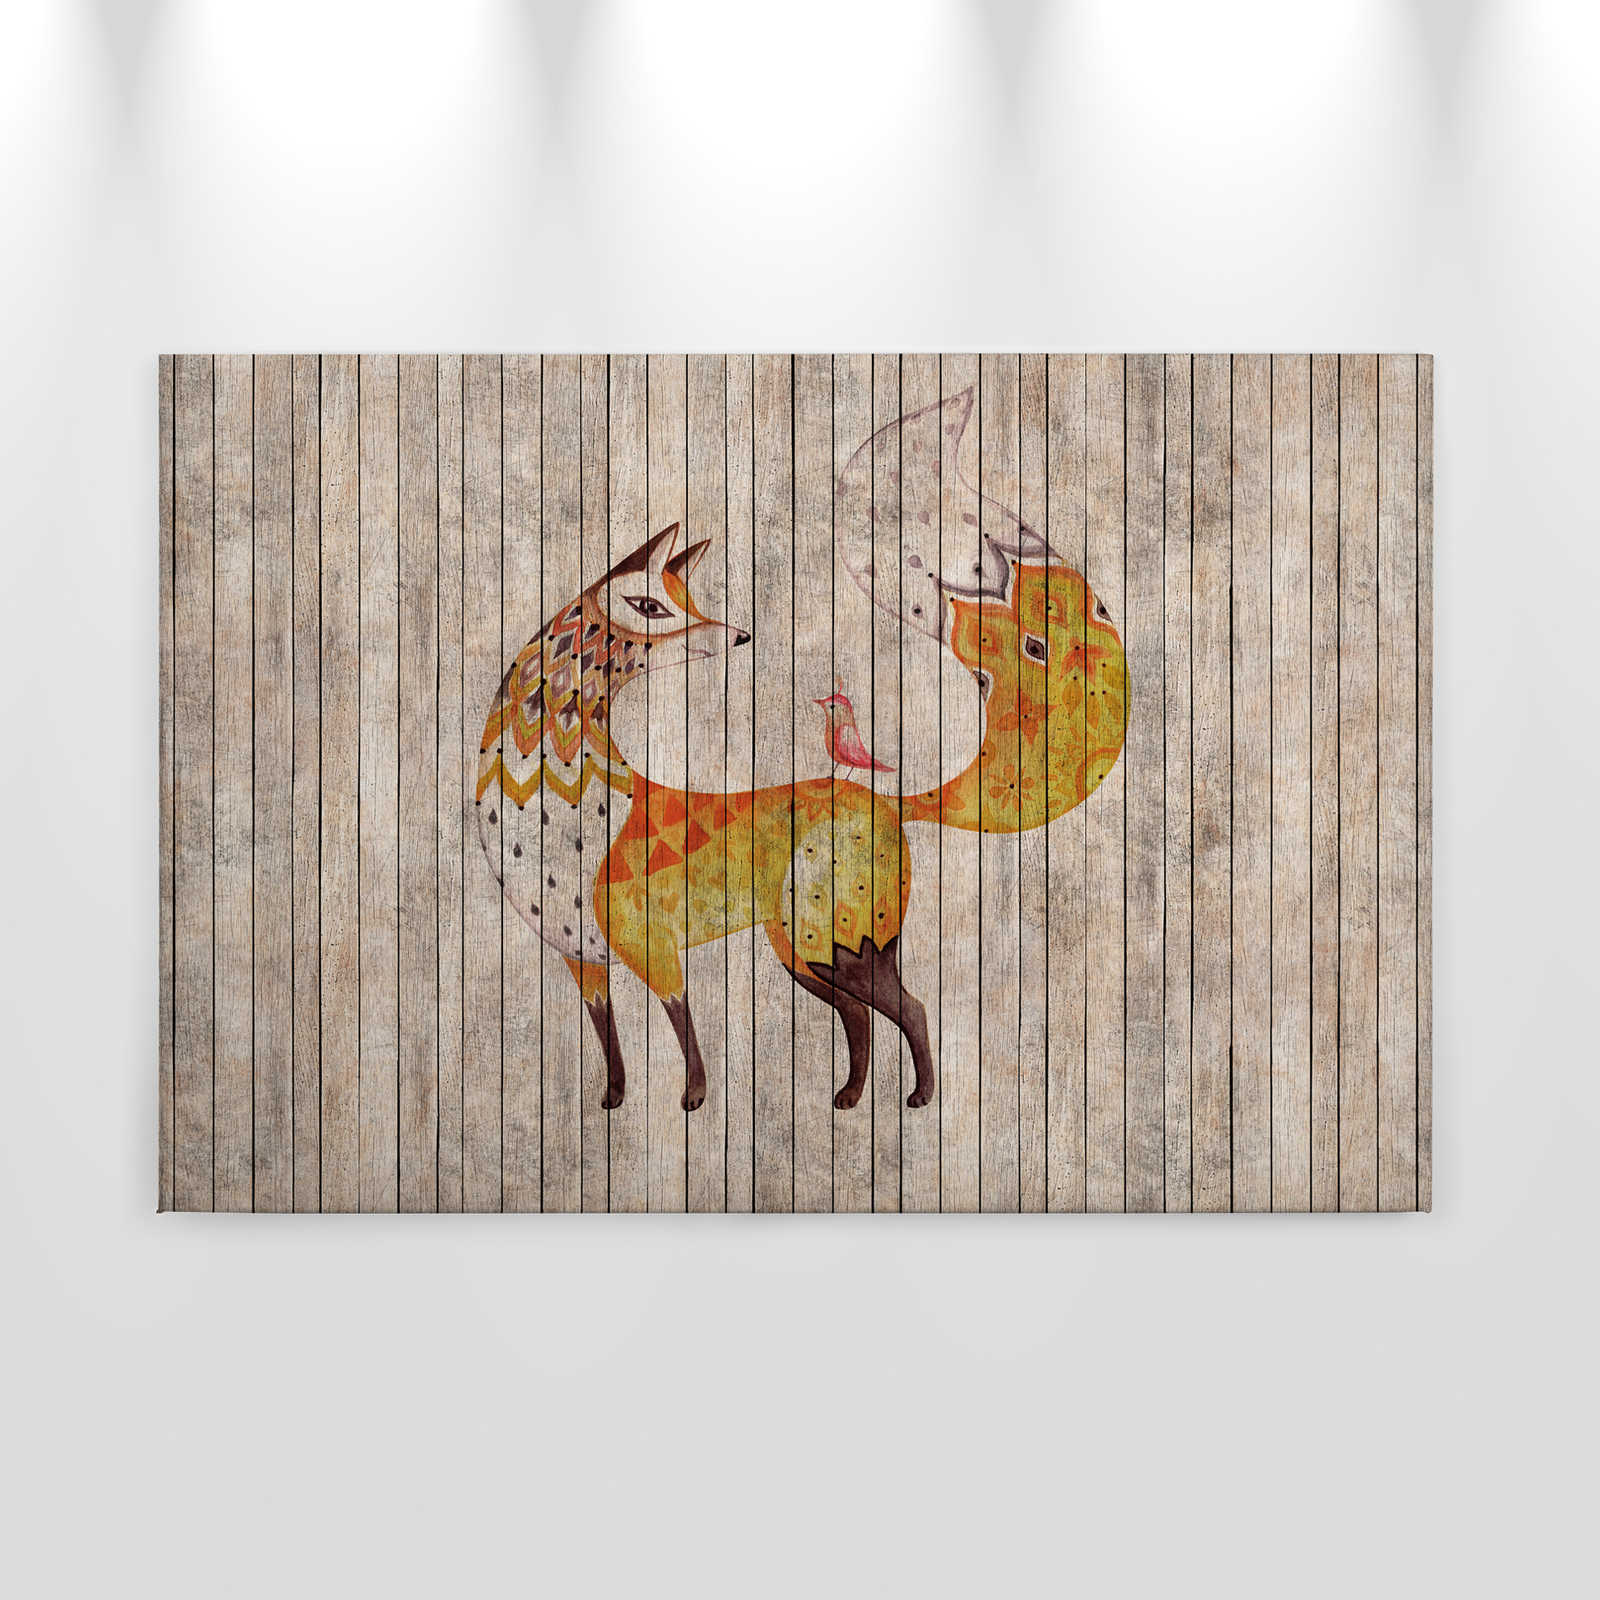             Fairy tale 2 - Fox and bird on wood look canvas picture - 0.90 m x 0.60 m
        